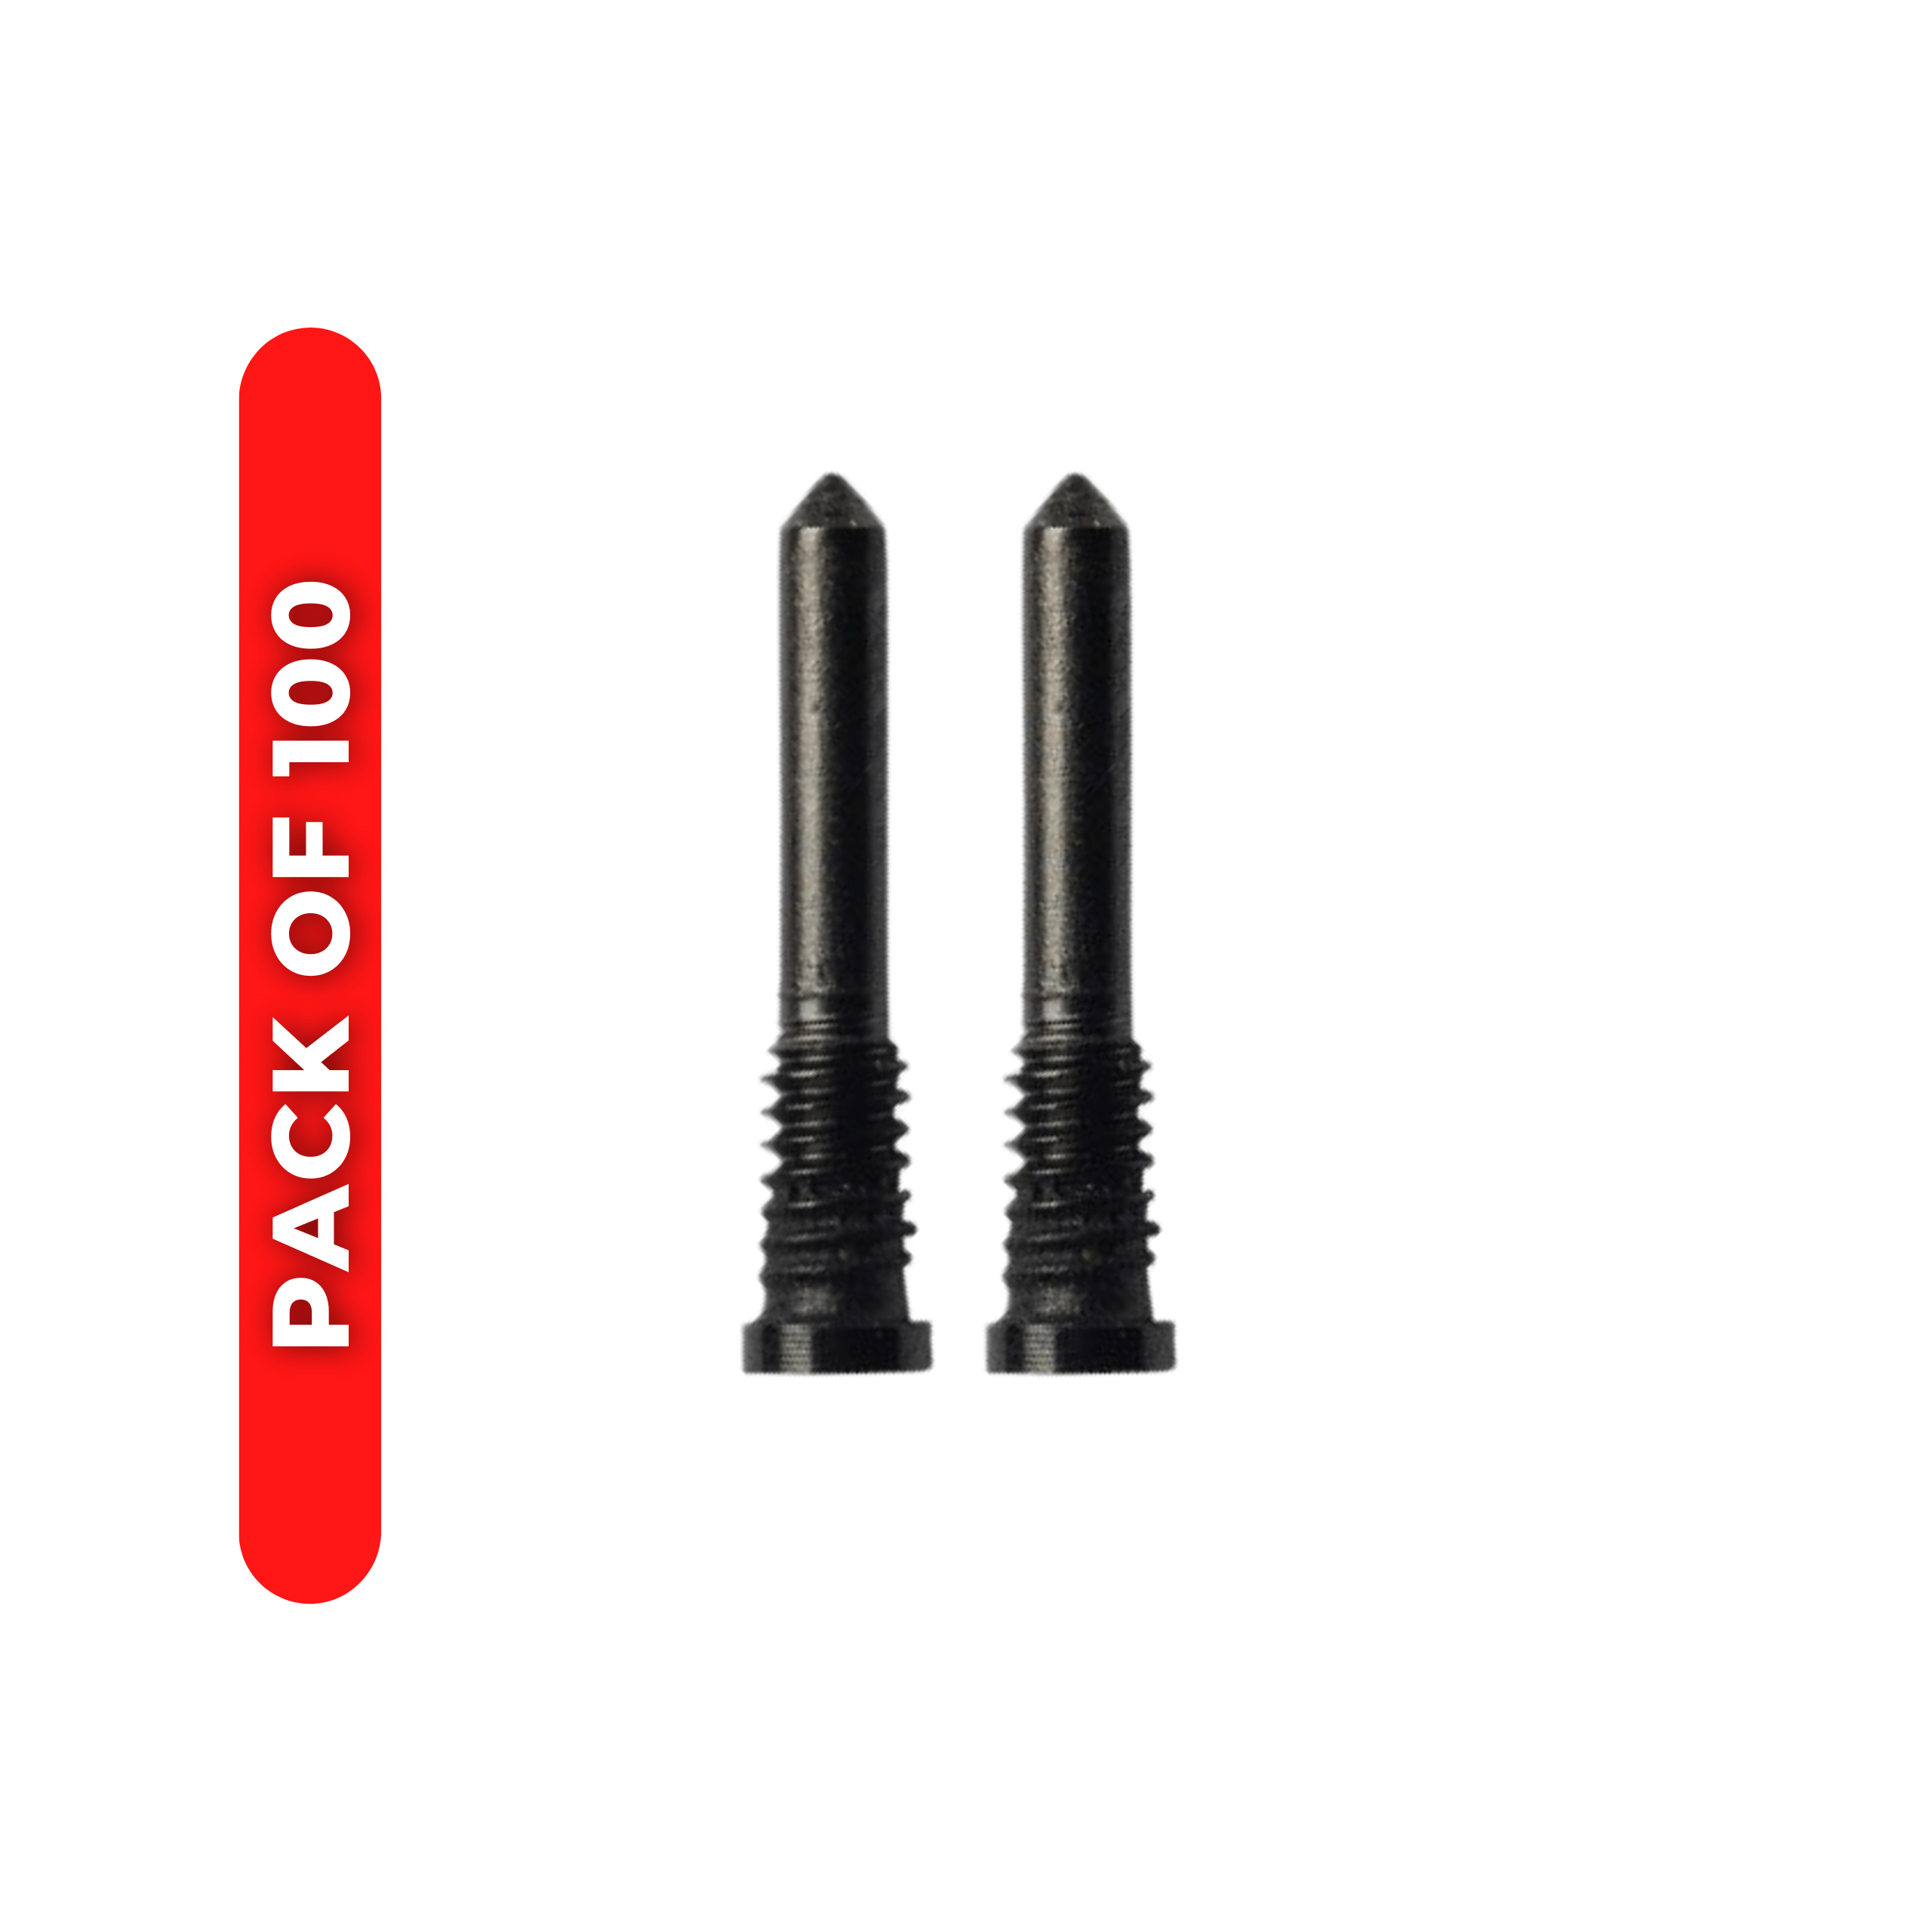 Bottom Screws for iPhone X and up (100 pack) Black